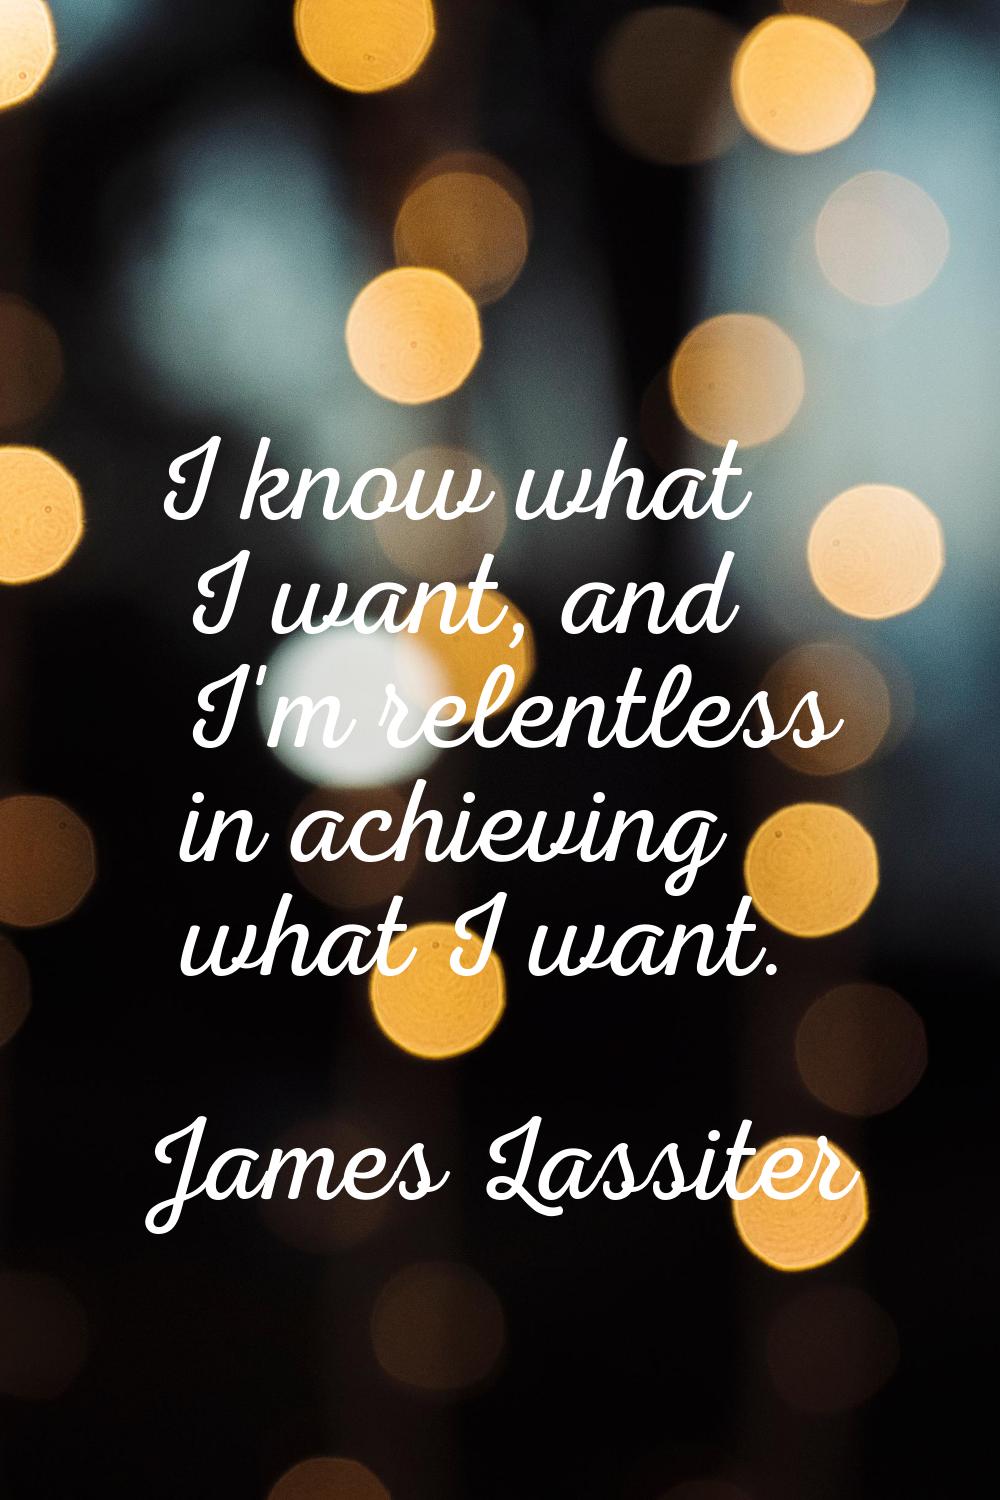 I know what I want, and I'm relentless in achieving what I want.